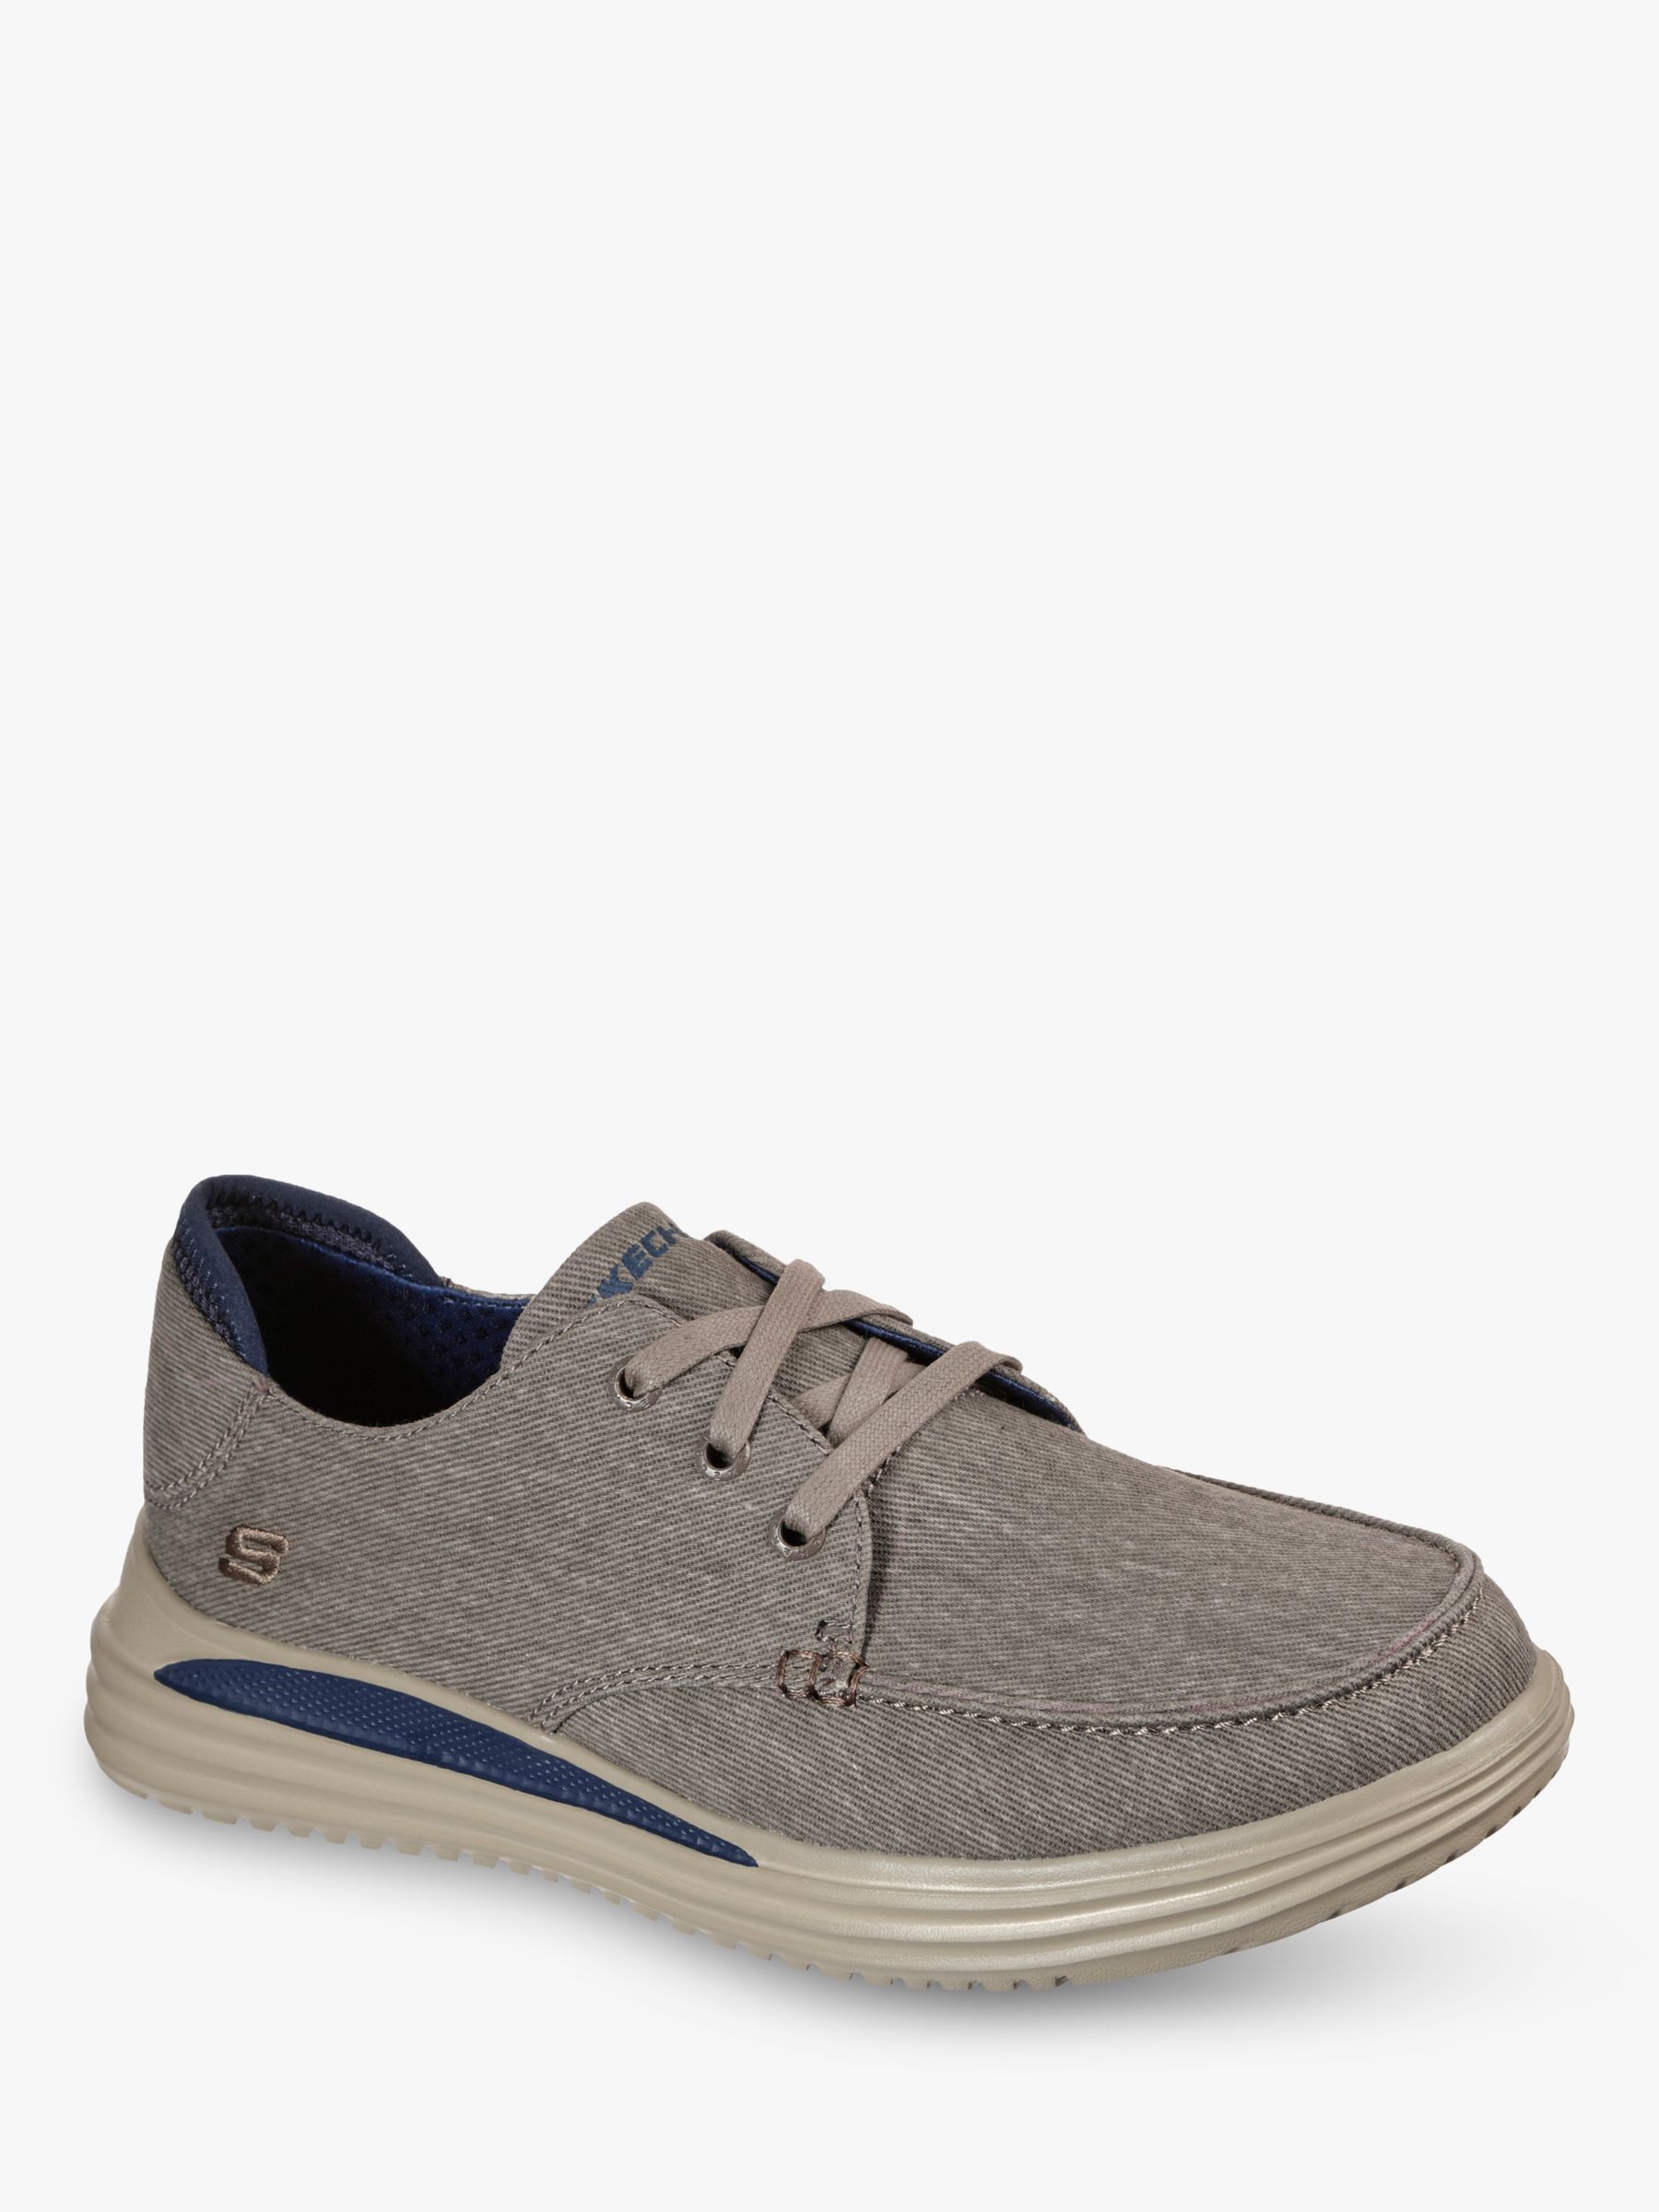 Skechers Proven Forenzo Canvas Casual Shoes, Grey